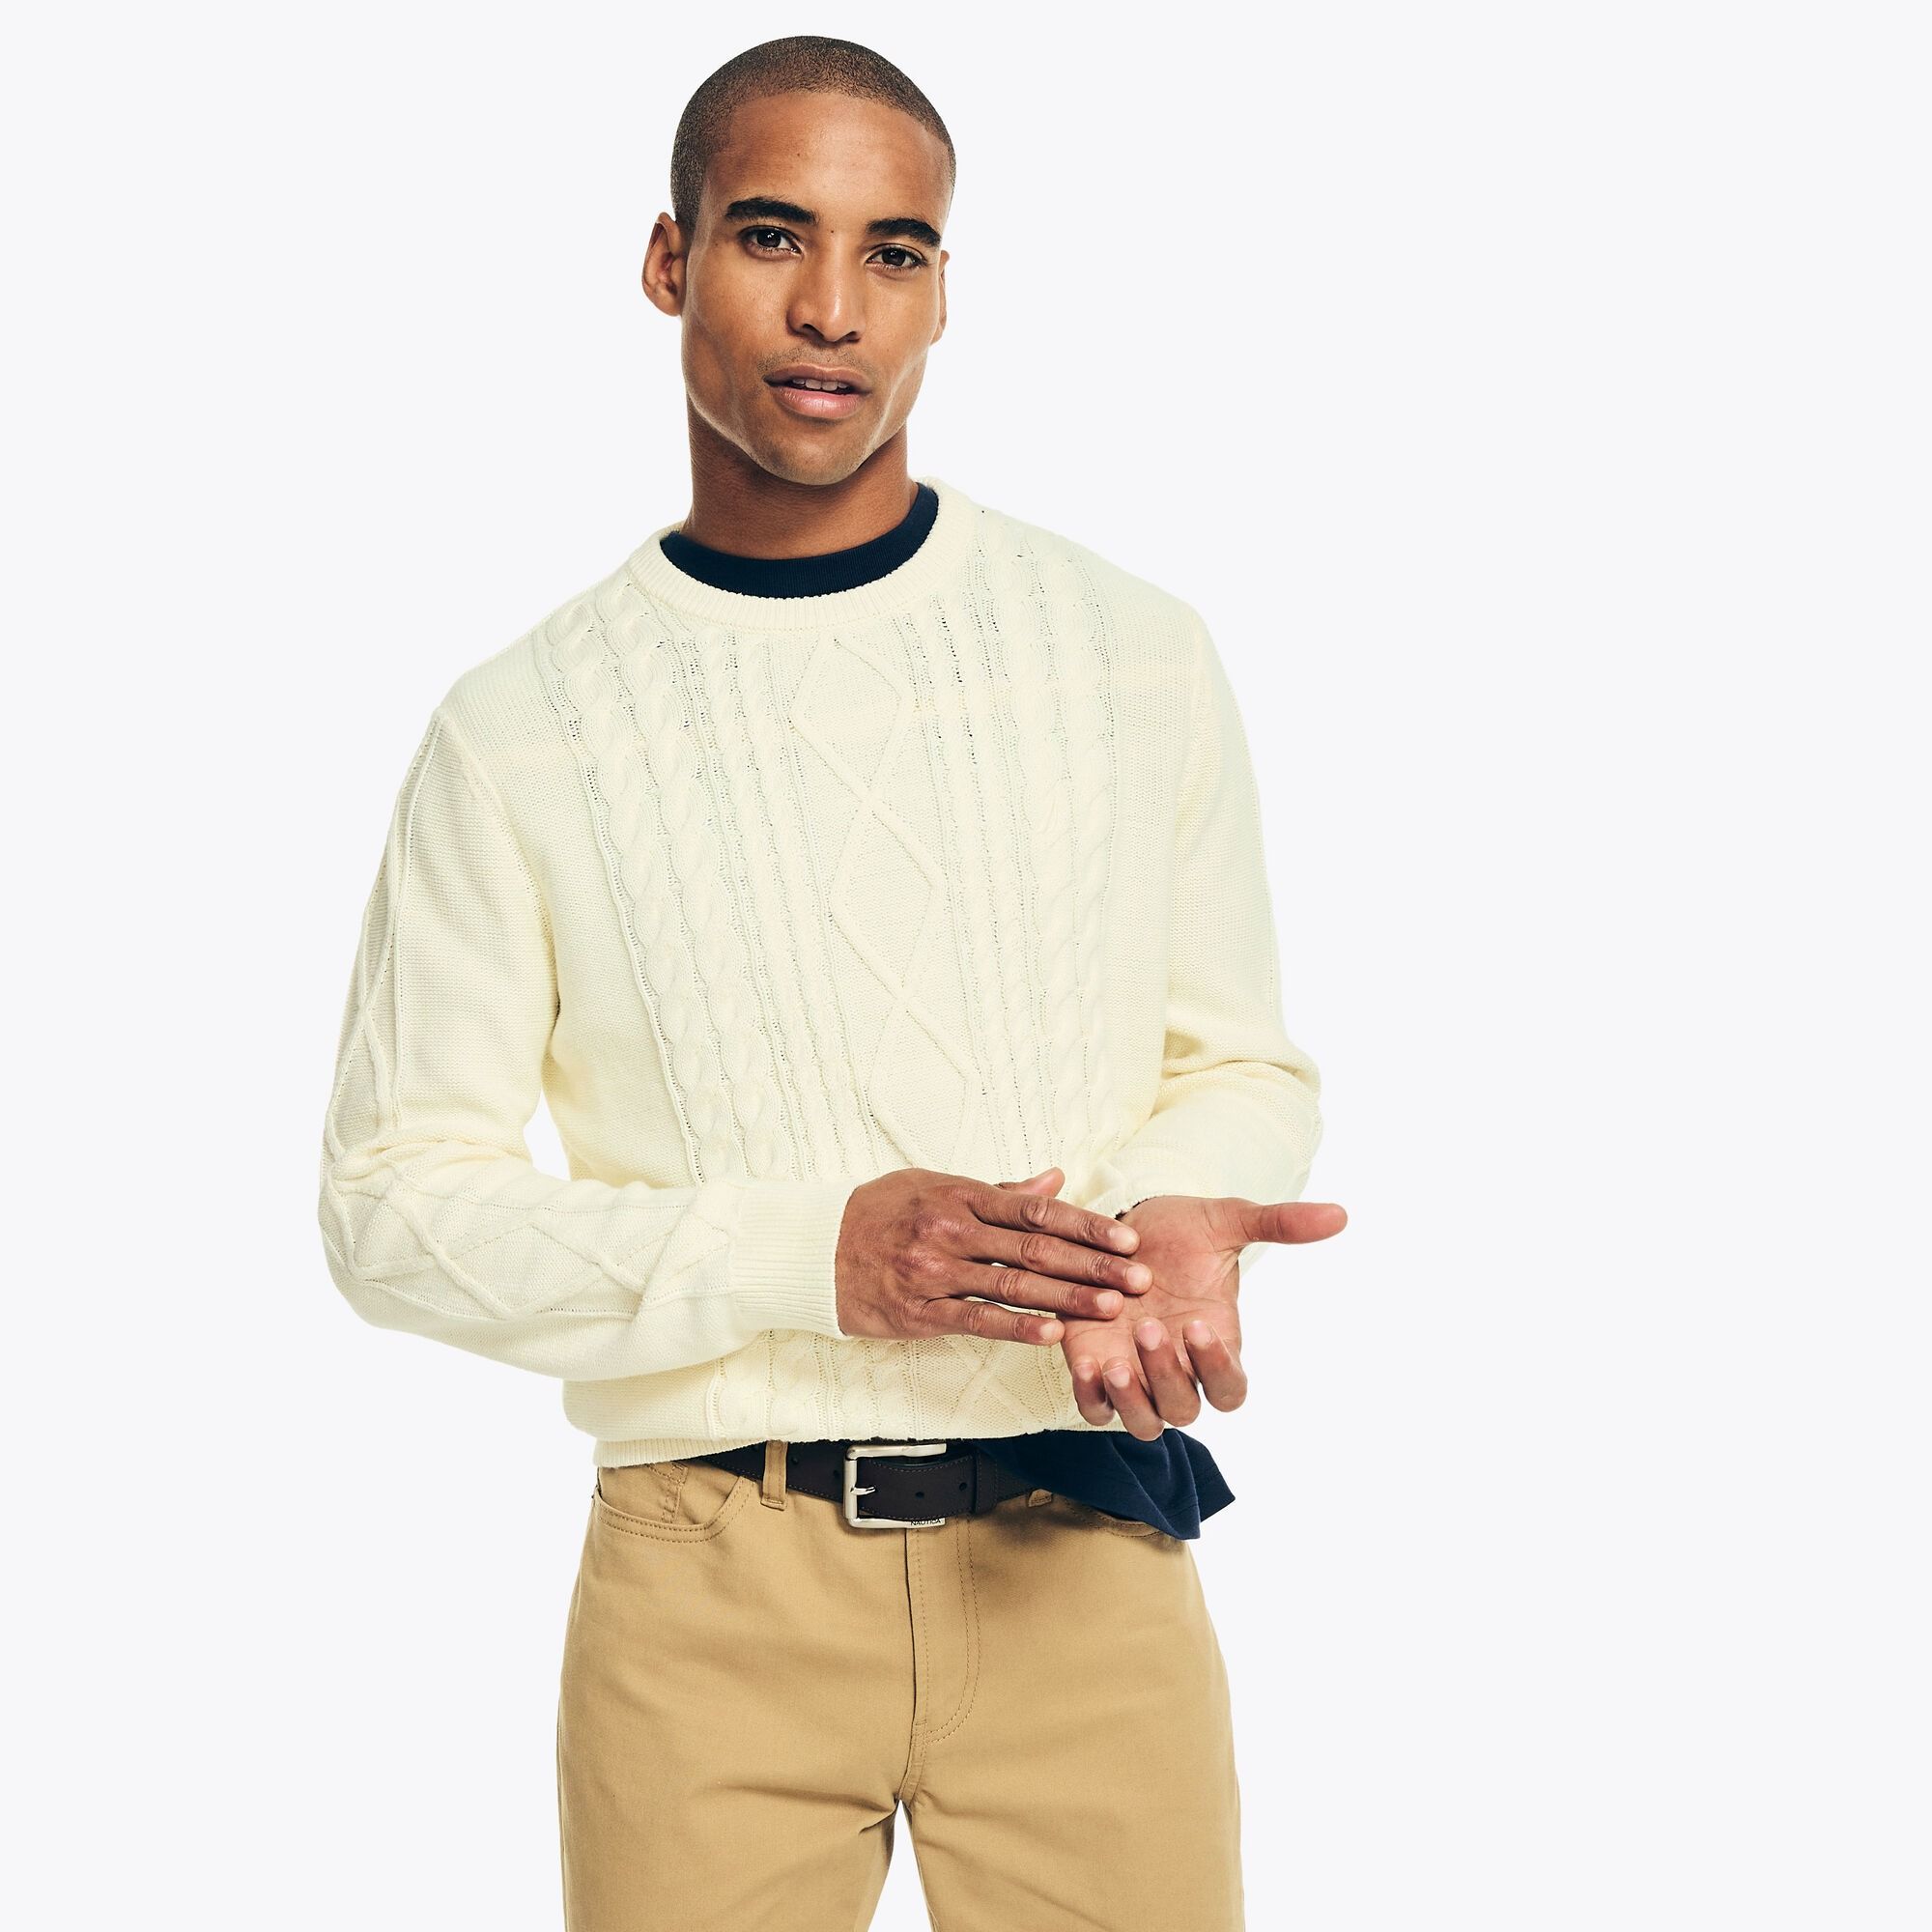 These Cable Knit Sweaters Are the Easiest Way to Look Good in the Cold